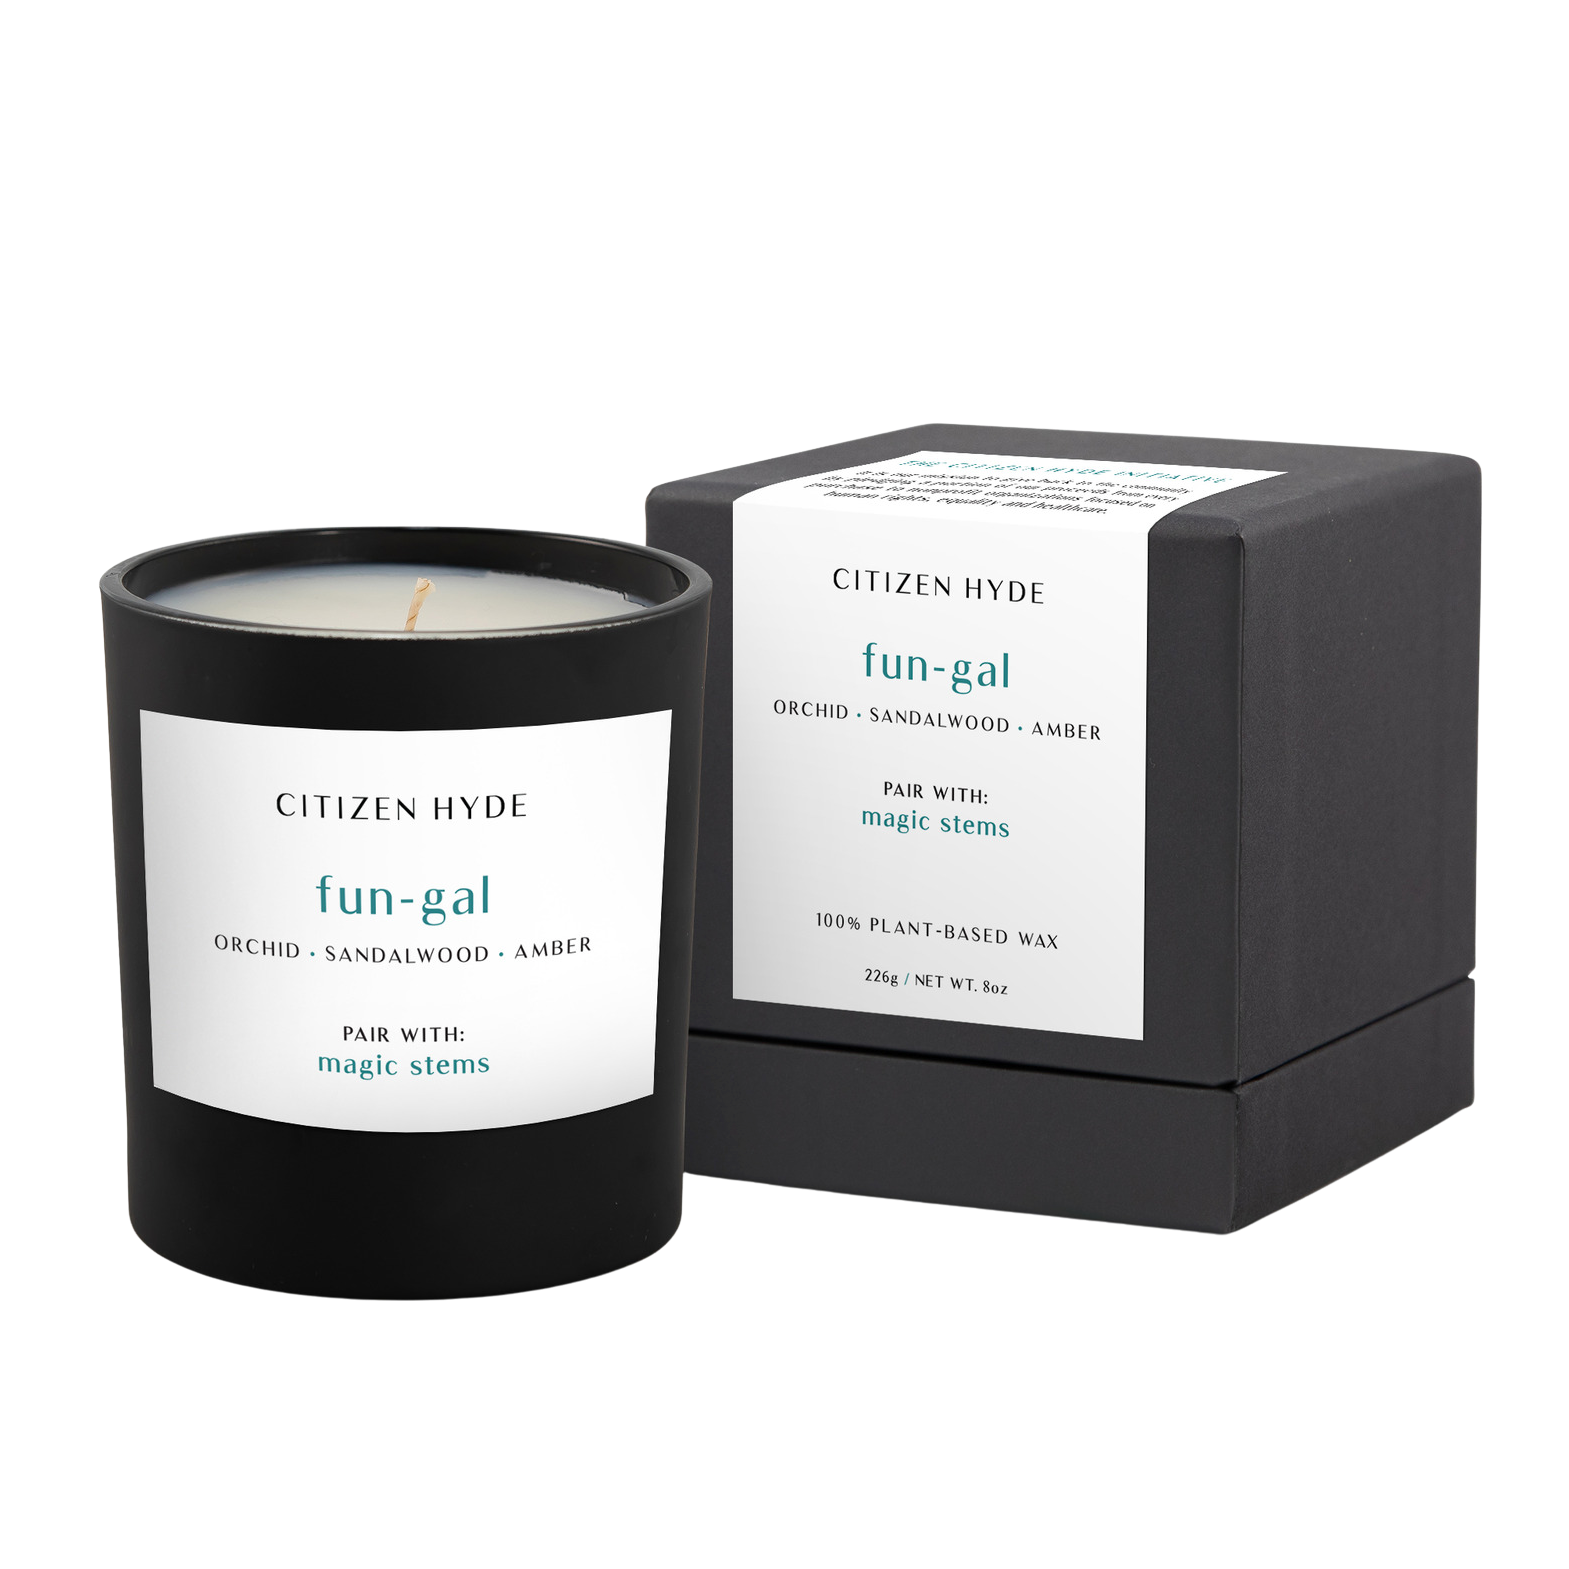 fun-gal Citizen Hyde Candle, pair with magic stems